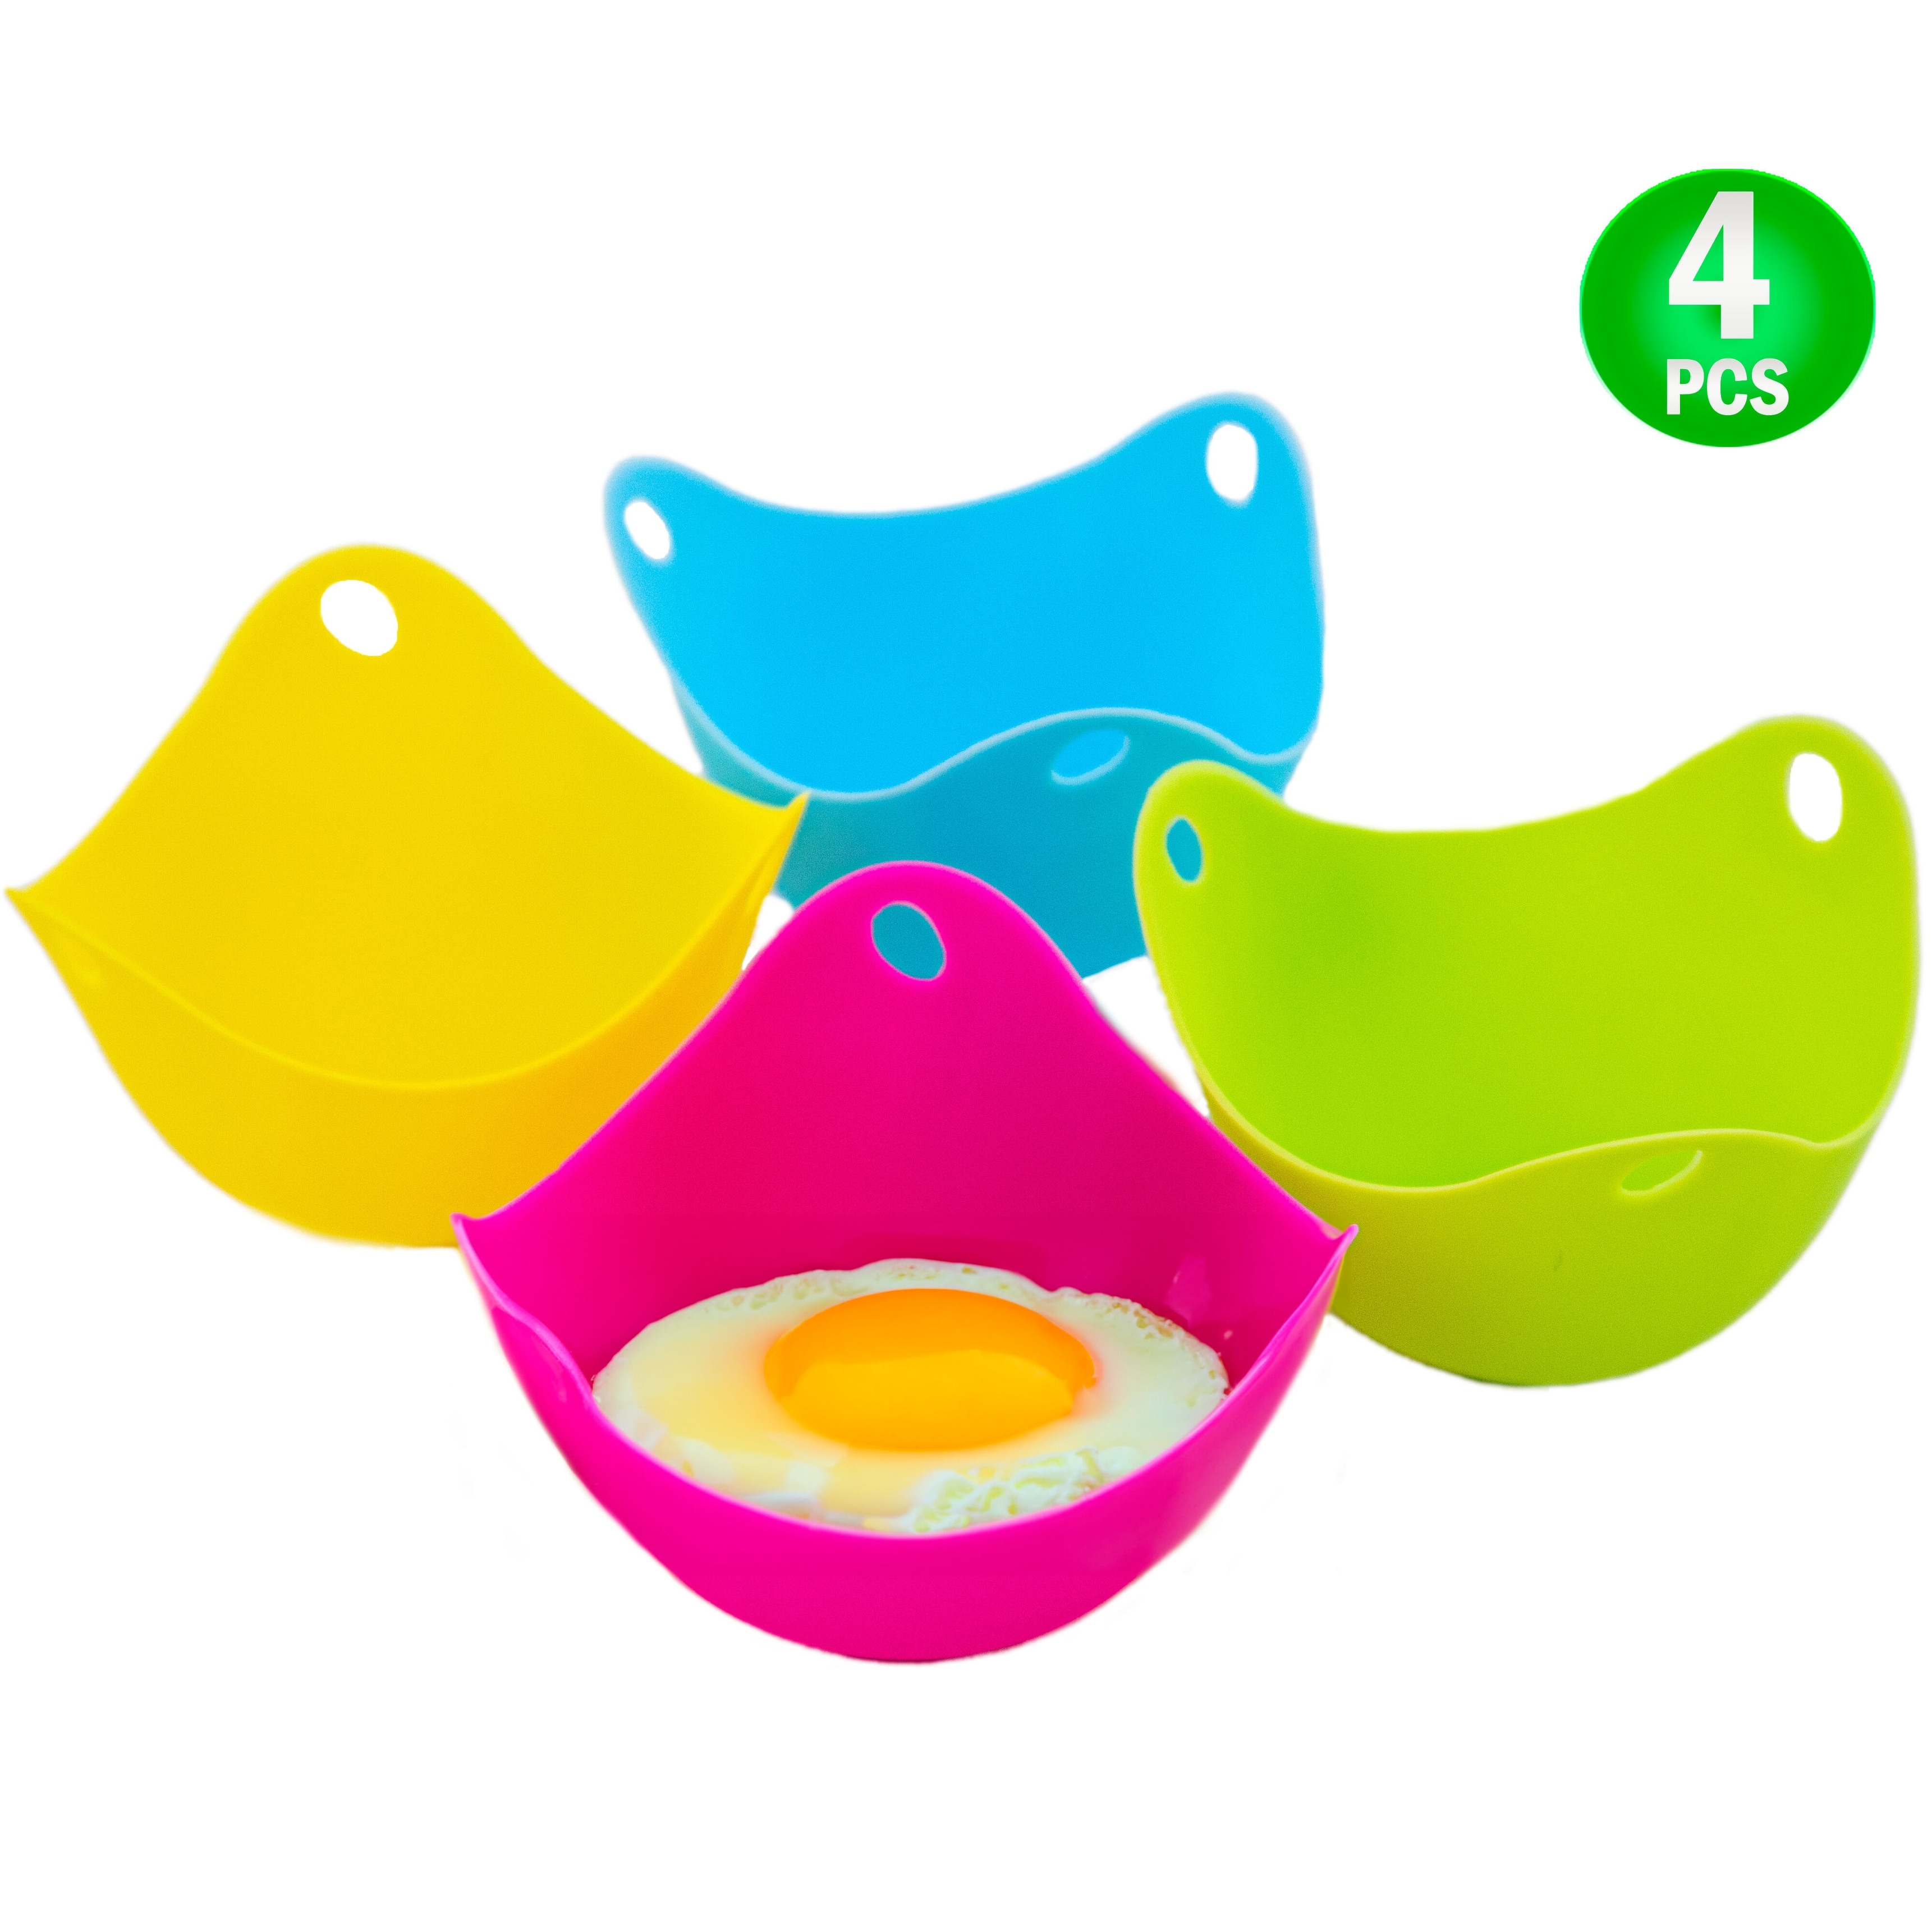 Silicone Egg Cups - Set of 3